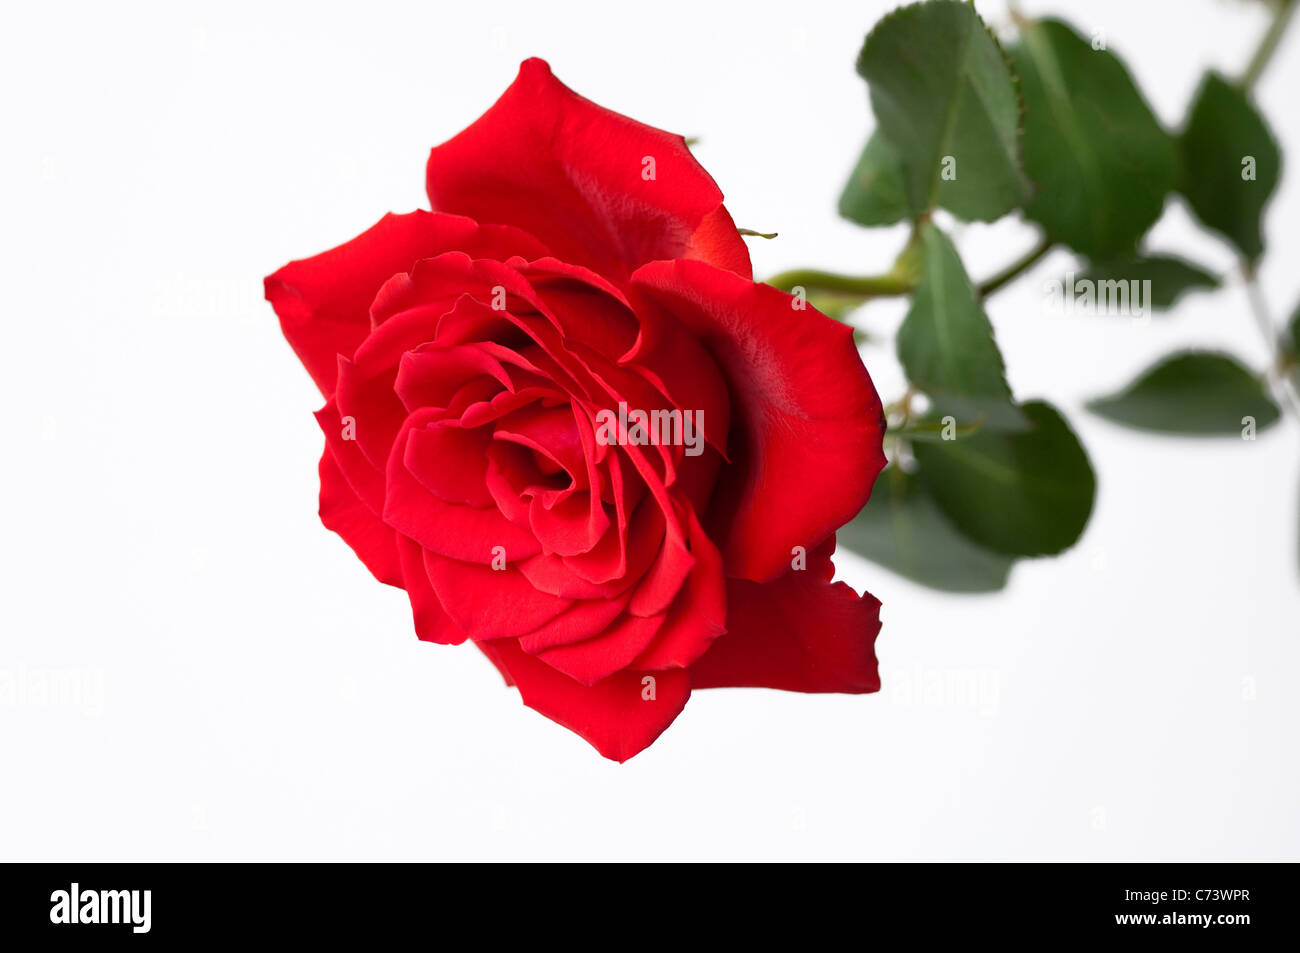 Rose (Rosa sp.), red flower. Studio picture against a white background. Stock Photo